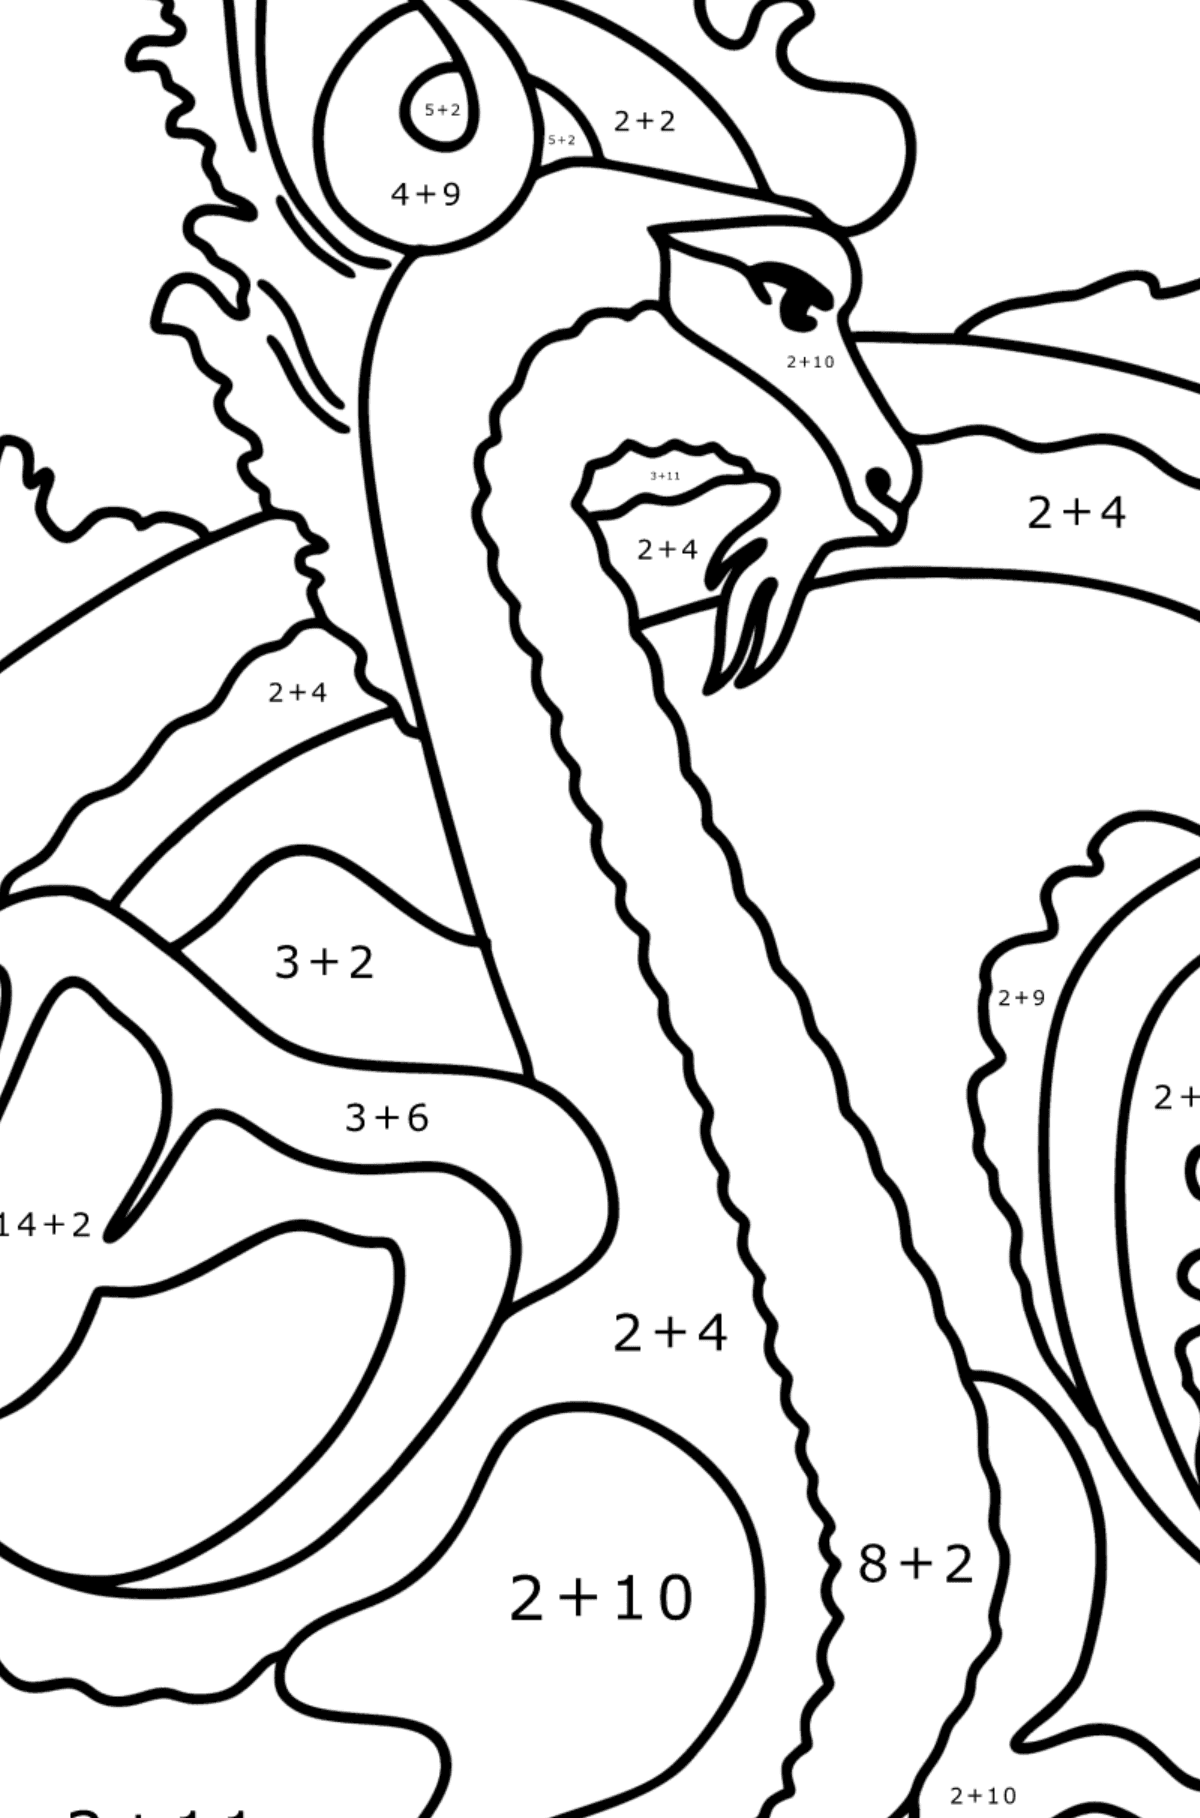 Mythical Dragon coloring page - Math Coloring - Addition for Kids